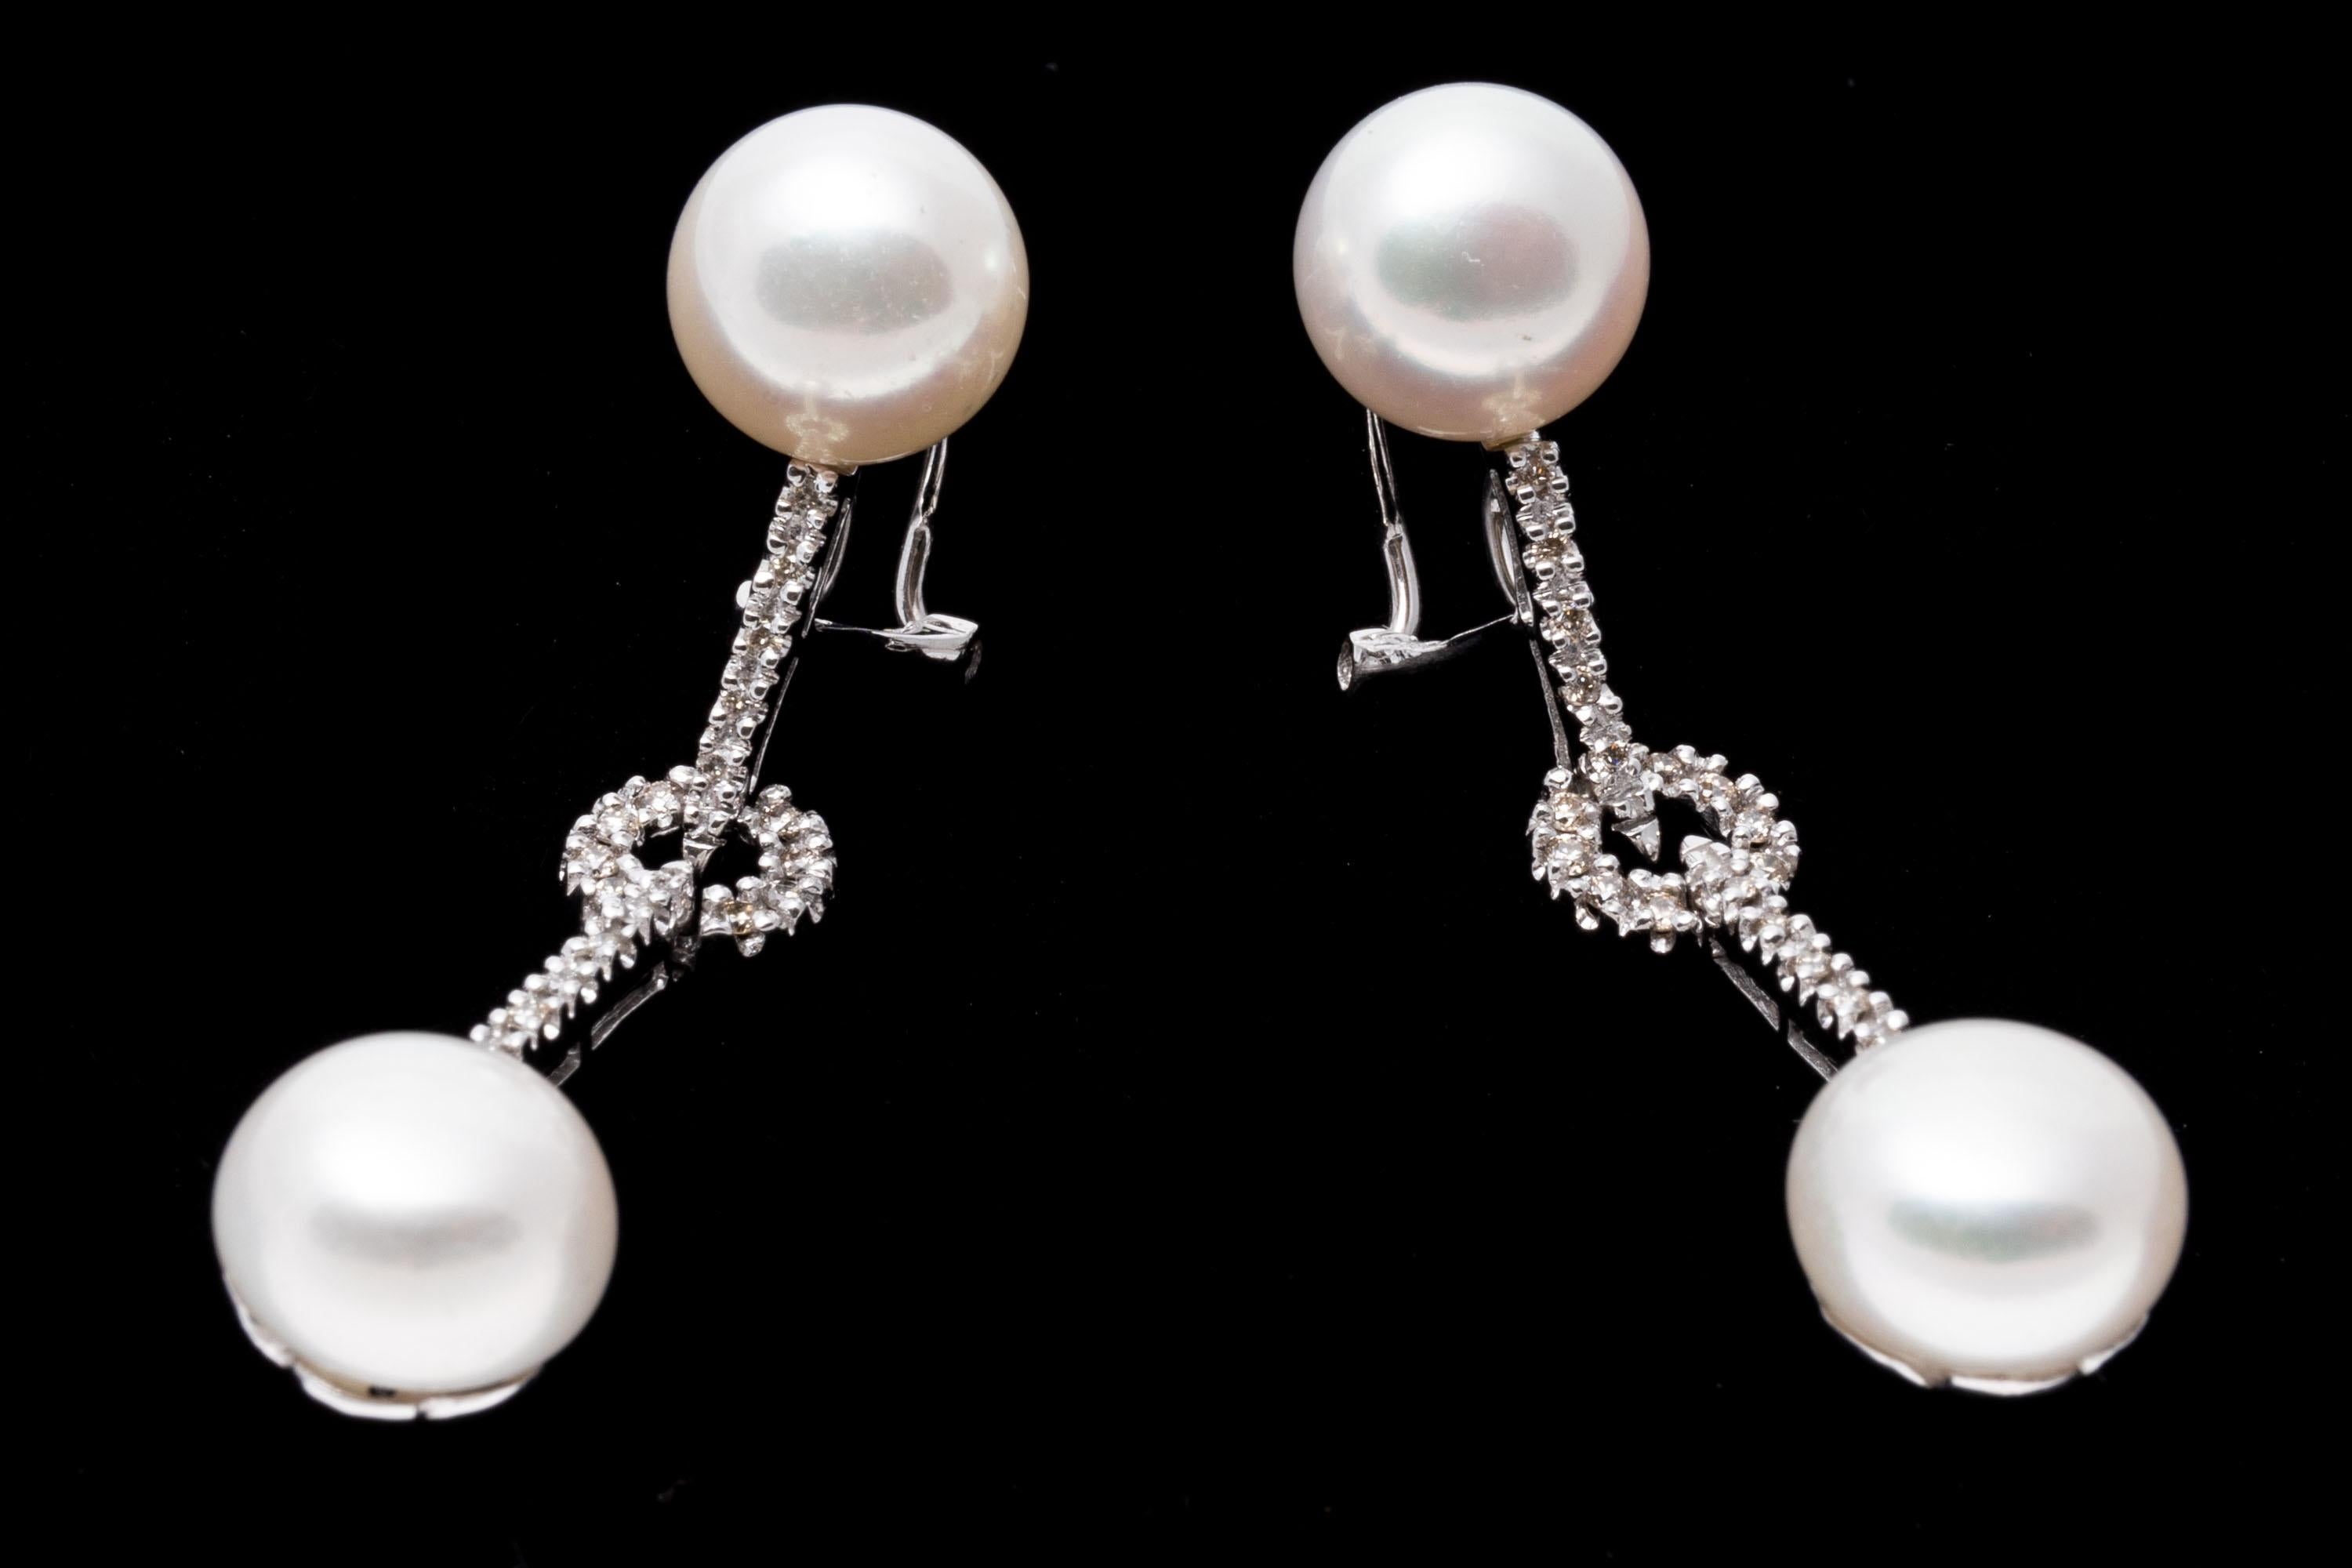 14K White Gold Drop Style Earrings with Pearls and Diamonds For Sale 1